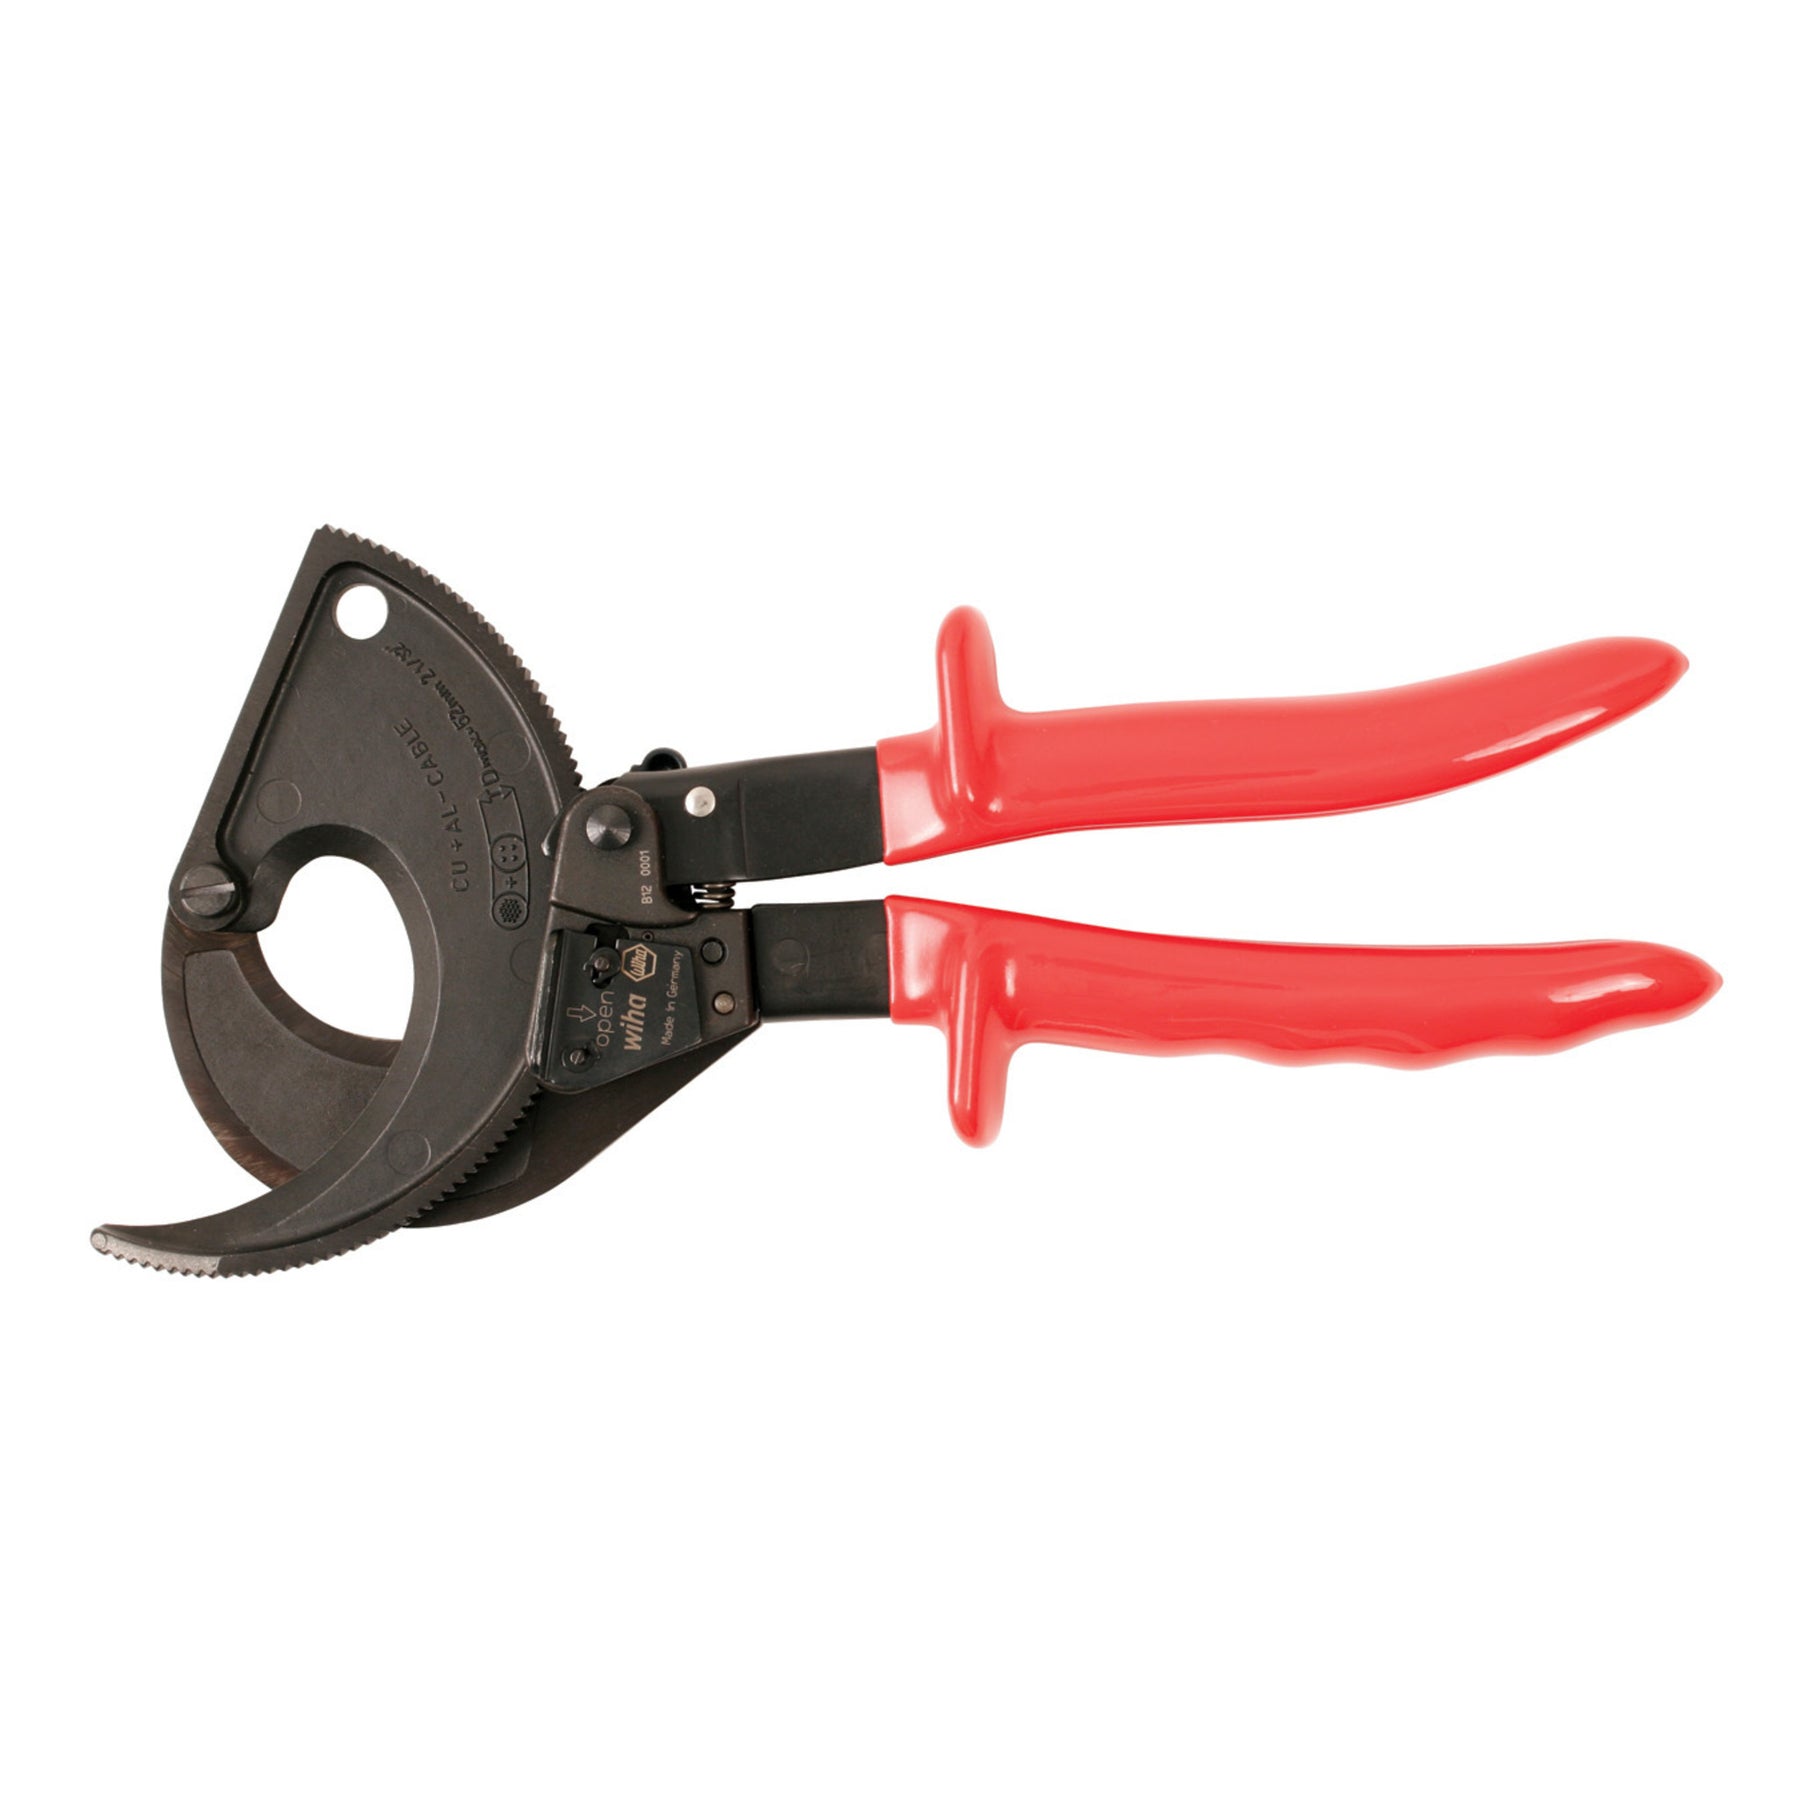 Wiha 11975 Insulated Ratcheting Cable Cutters 11"